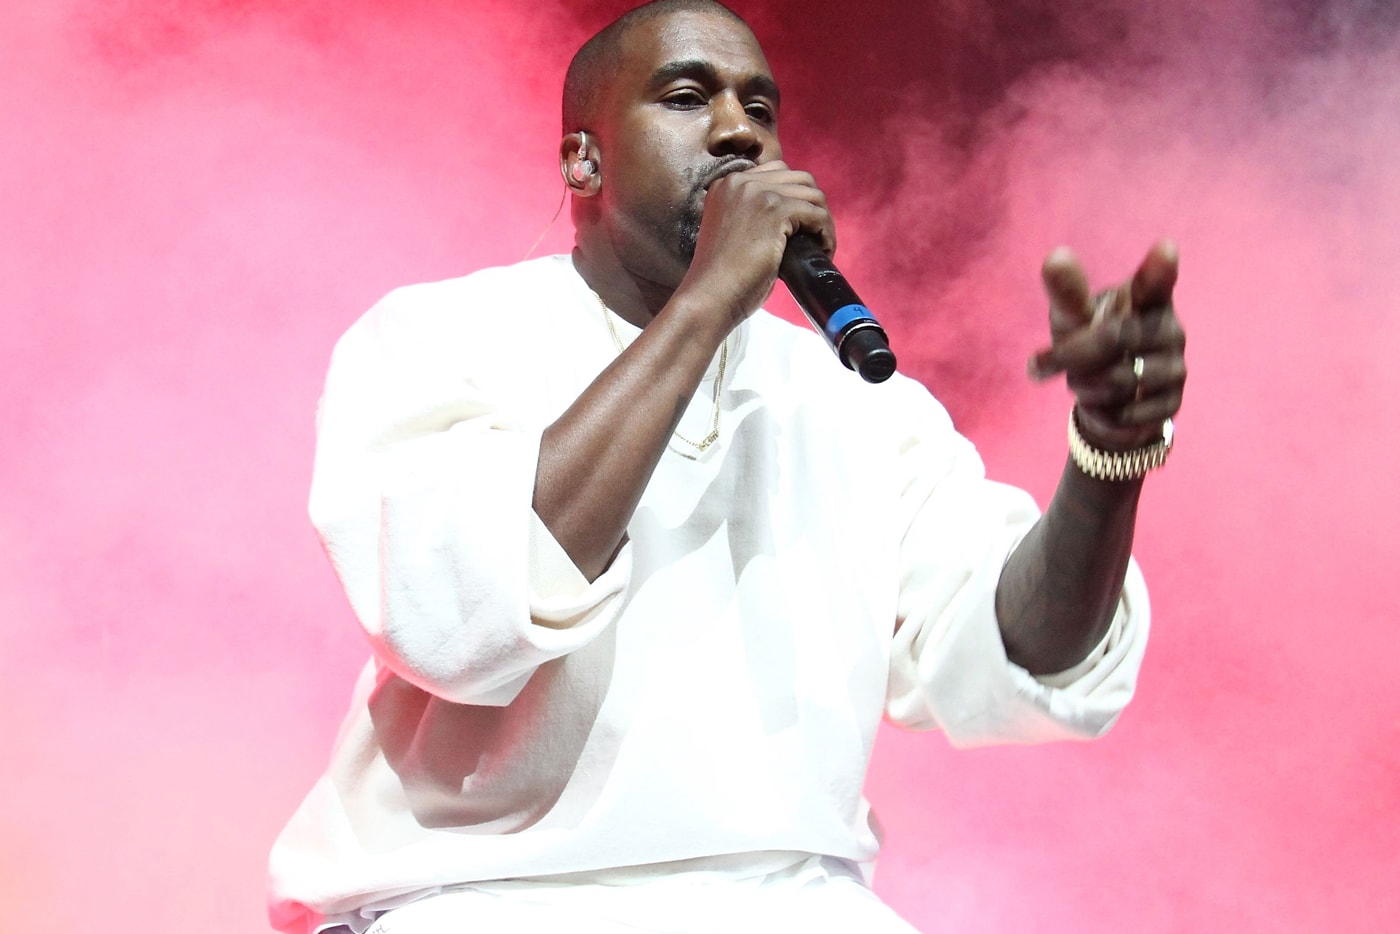 Kanye West Labels Taylor Swift as a "Fake Ass" in Backstage 'SNL' Rant